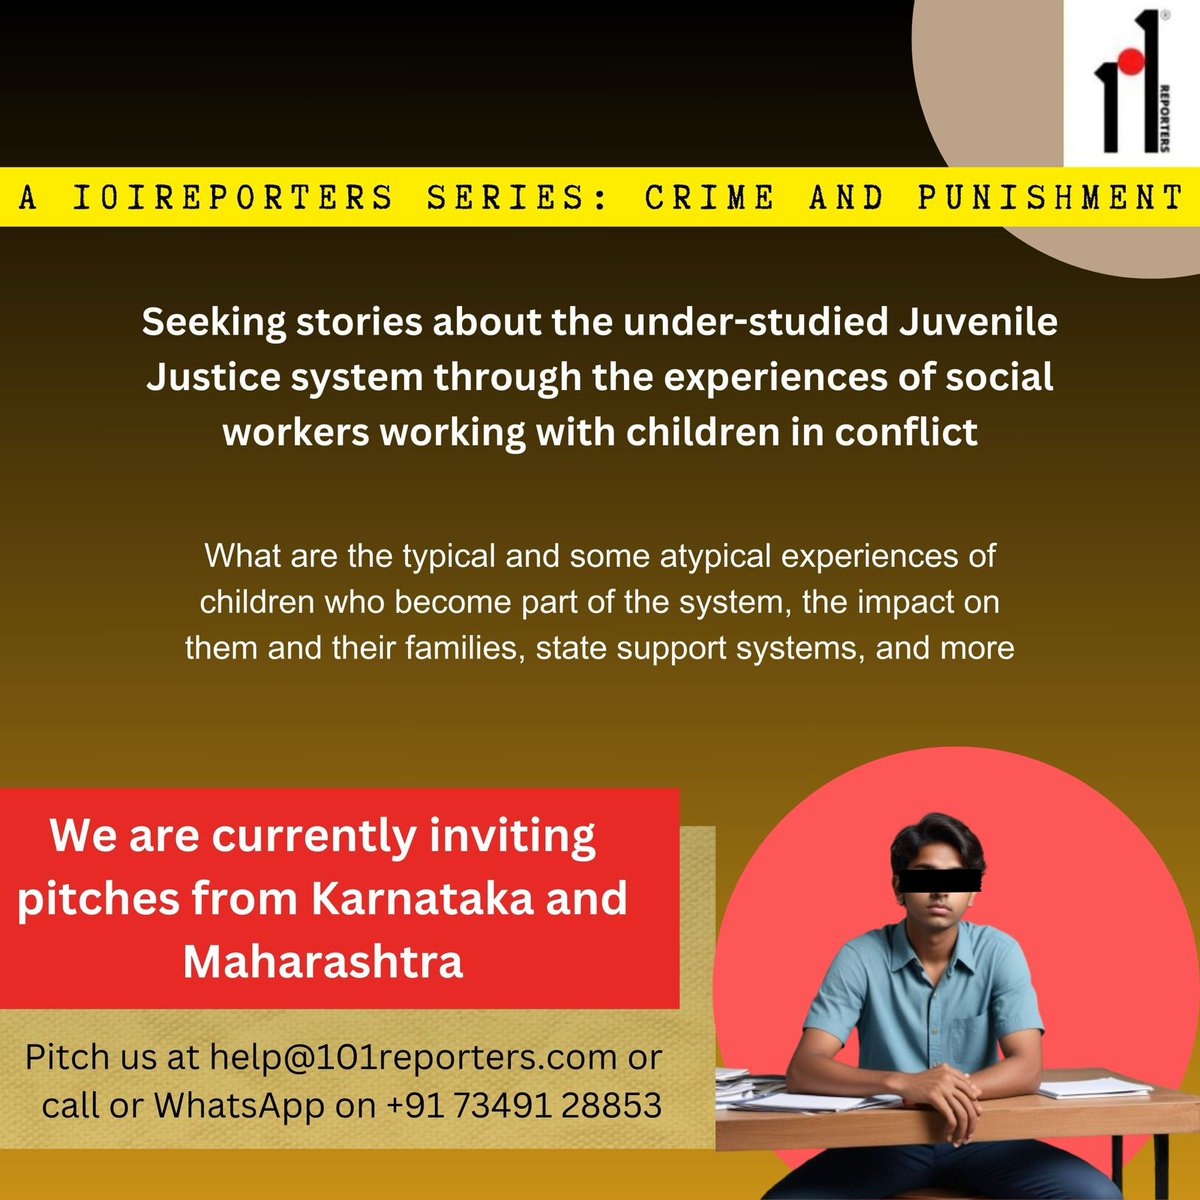 Seeking stories about the under-studied juvenile justice system in India. Have a pitch for us? Feel free to reach out! #callforpitches #callforjournalists